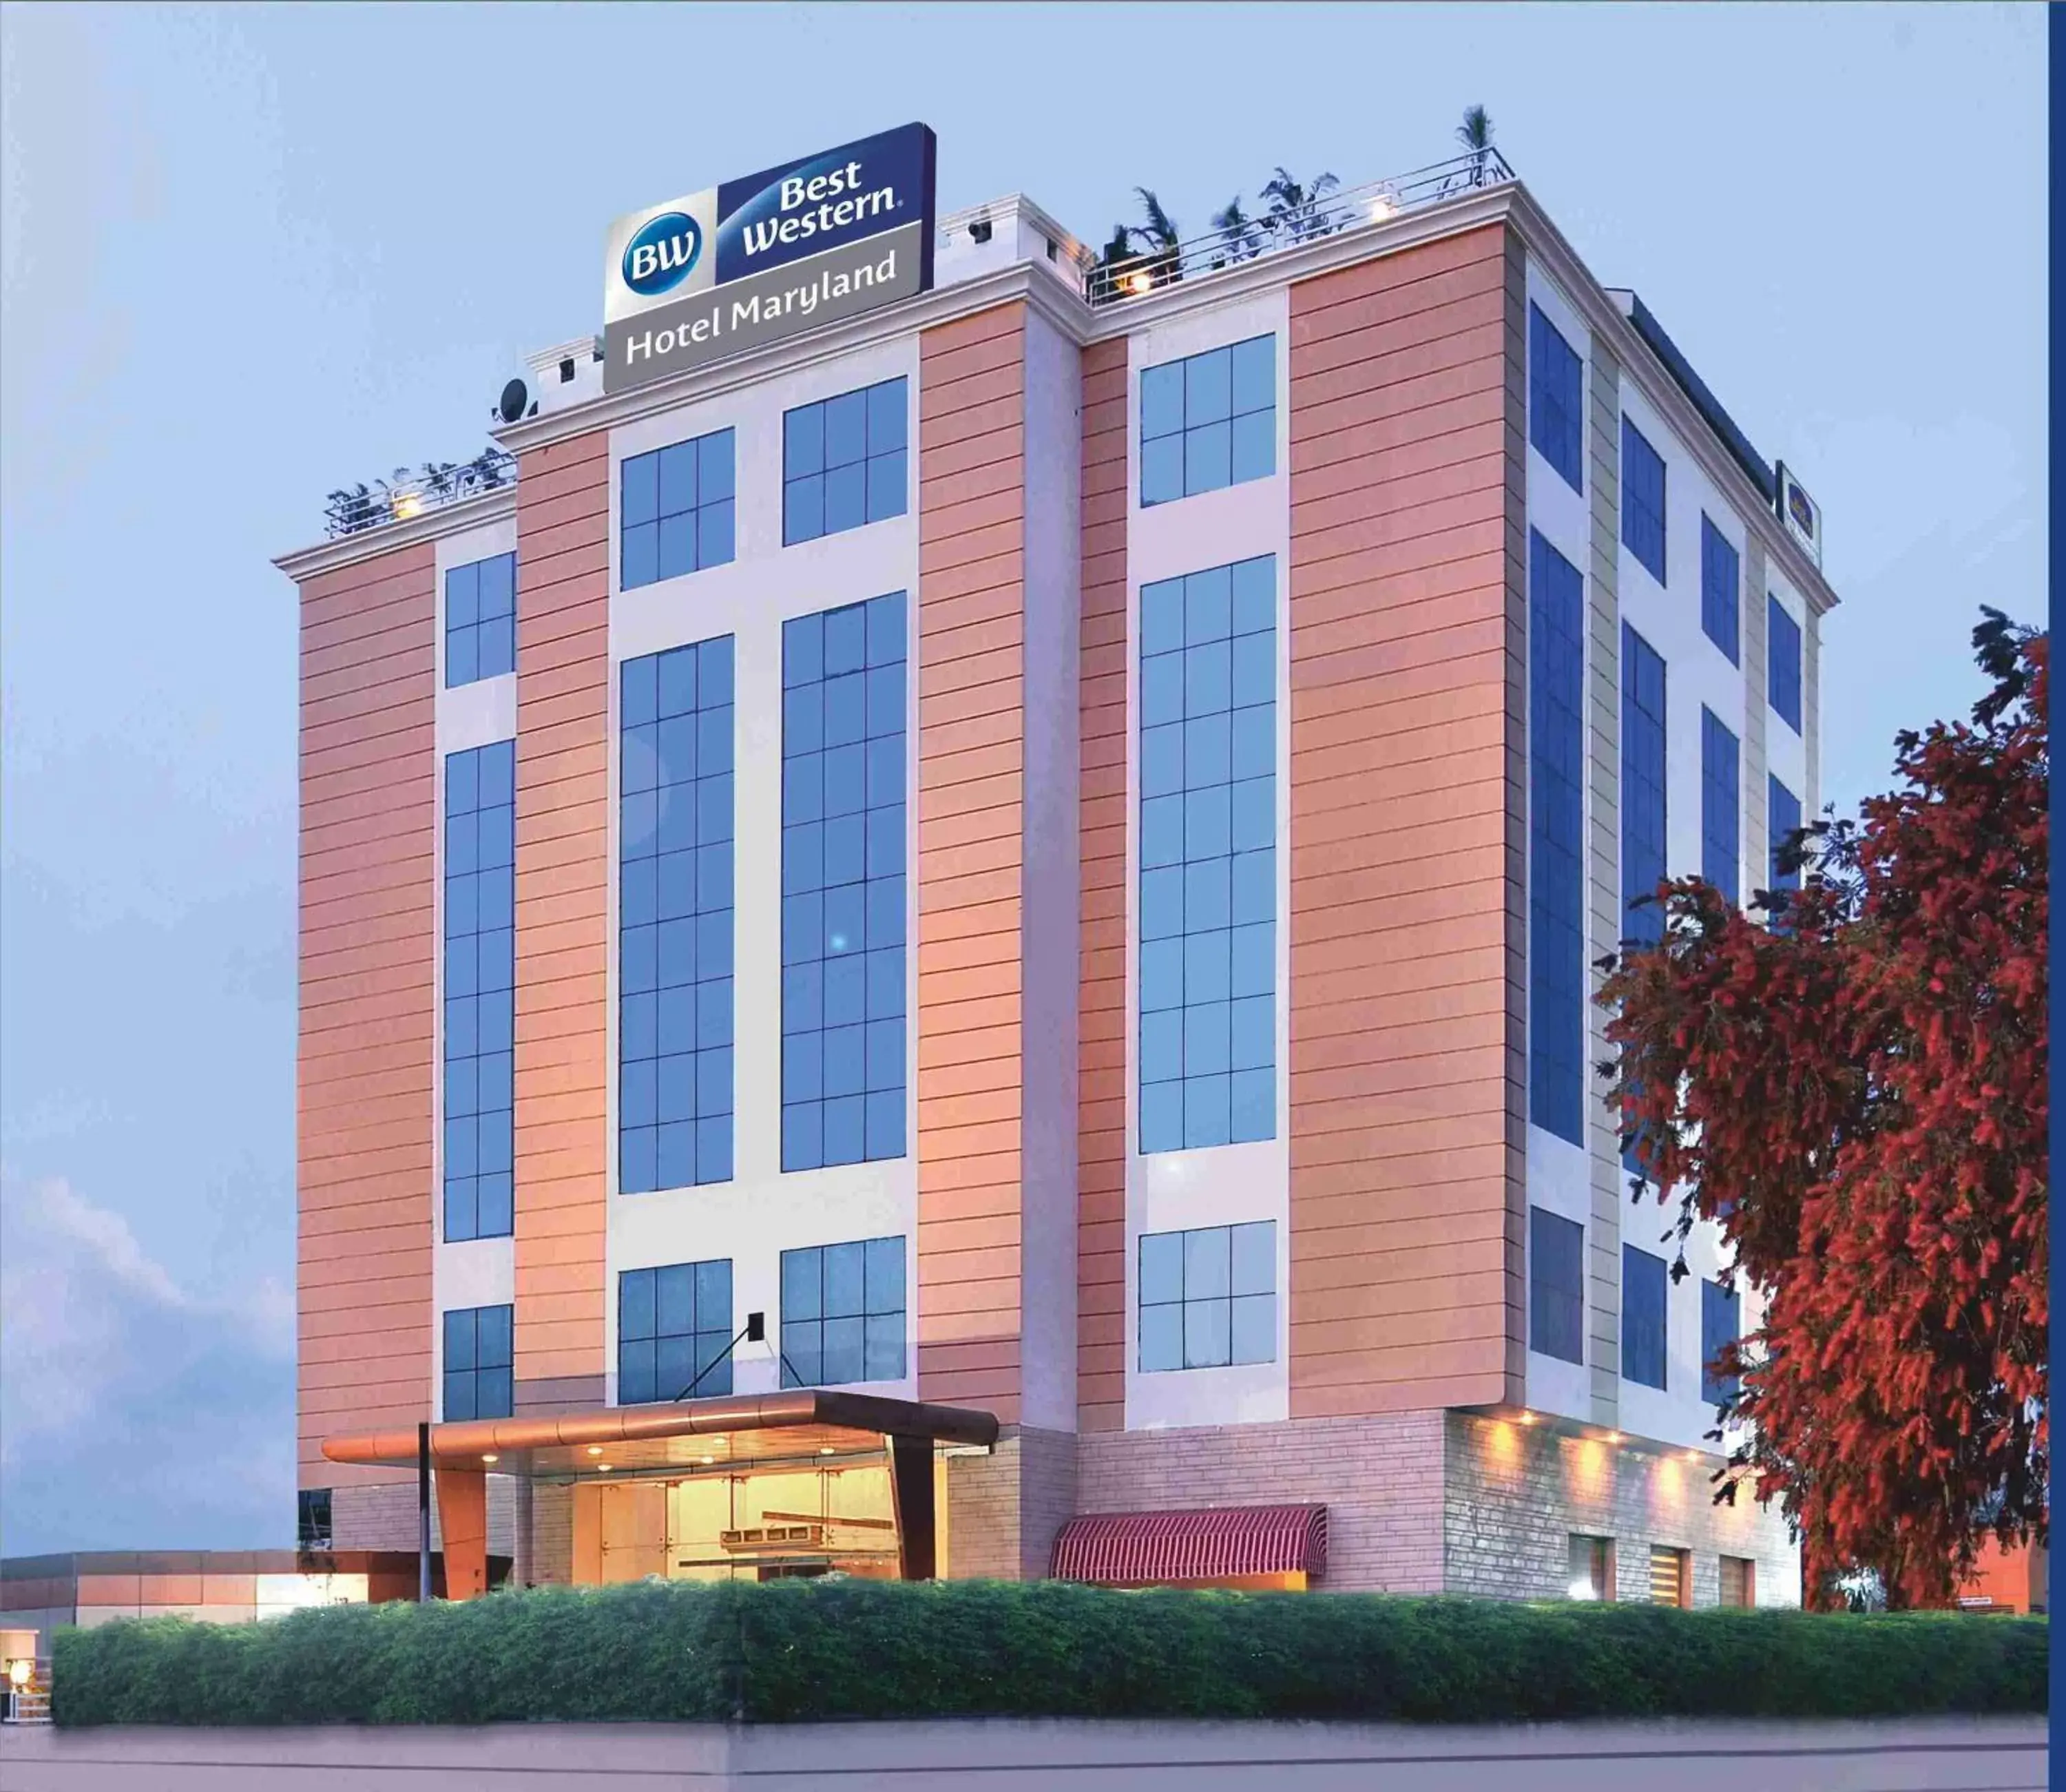 Property Building in Best Western Maryland Hotel